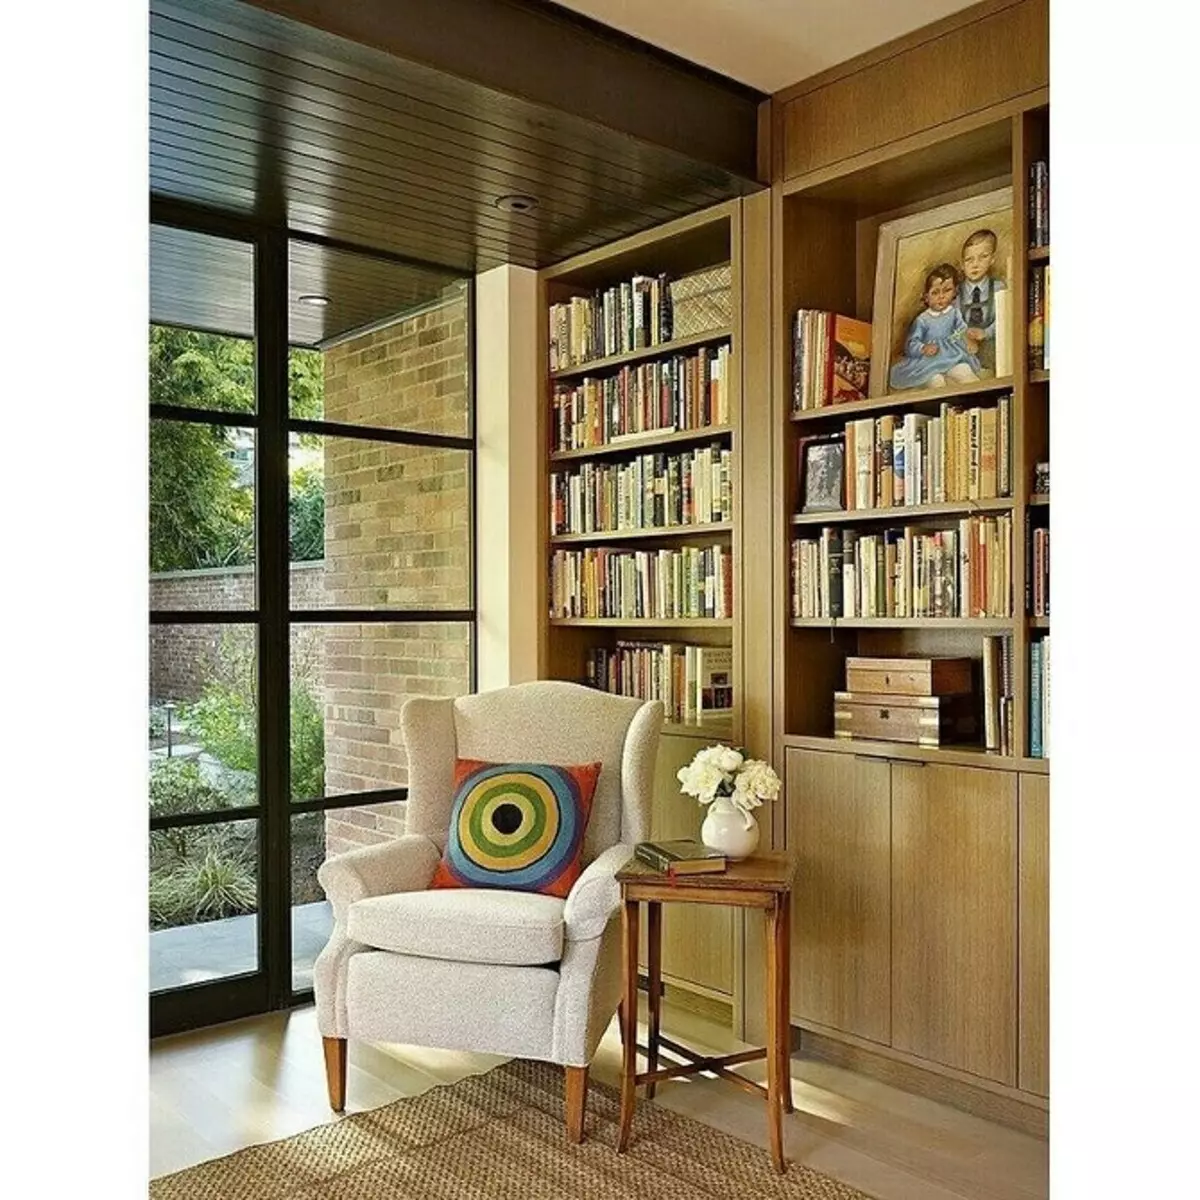 10 Interesting ways to equip a home library 8826_37